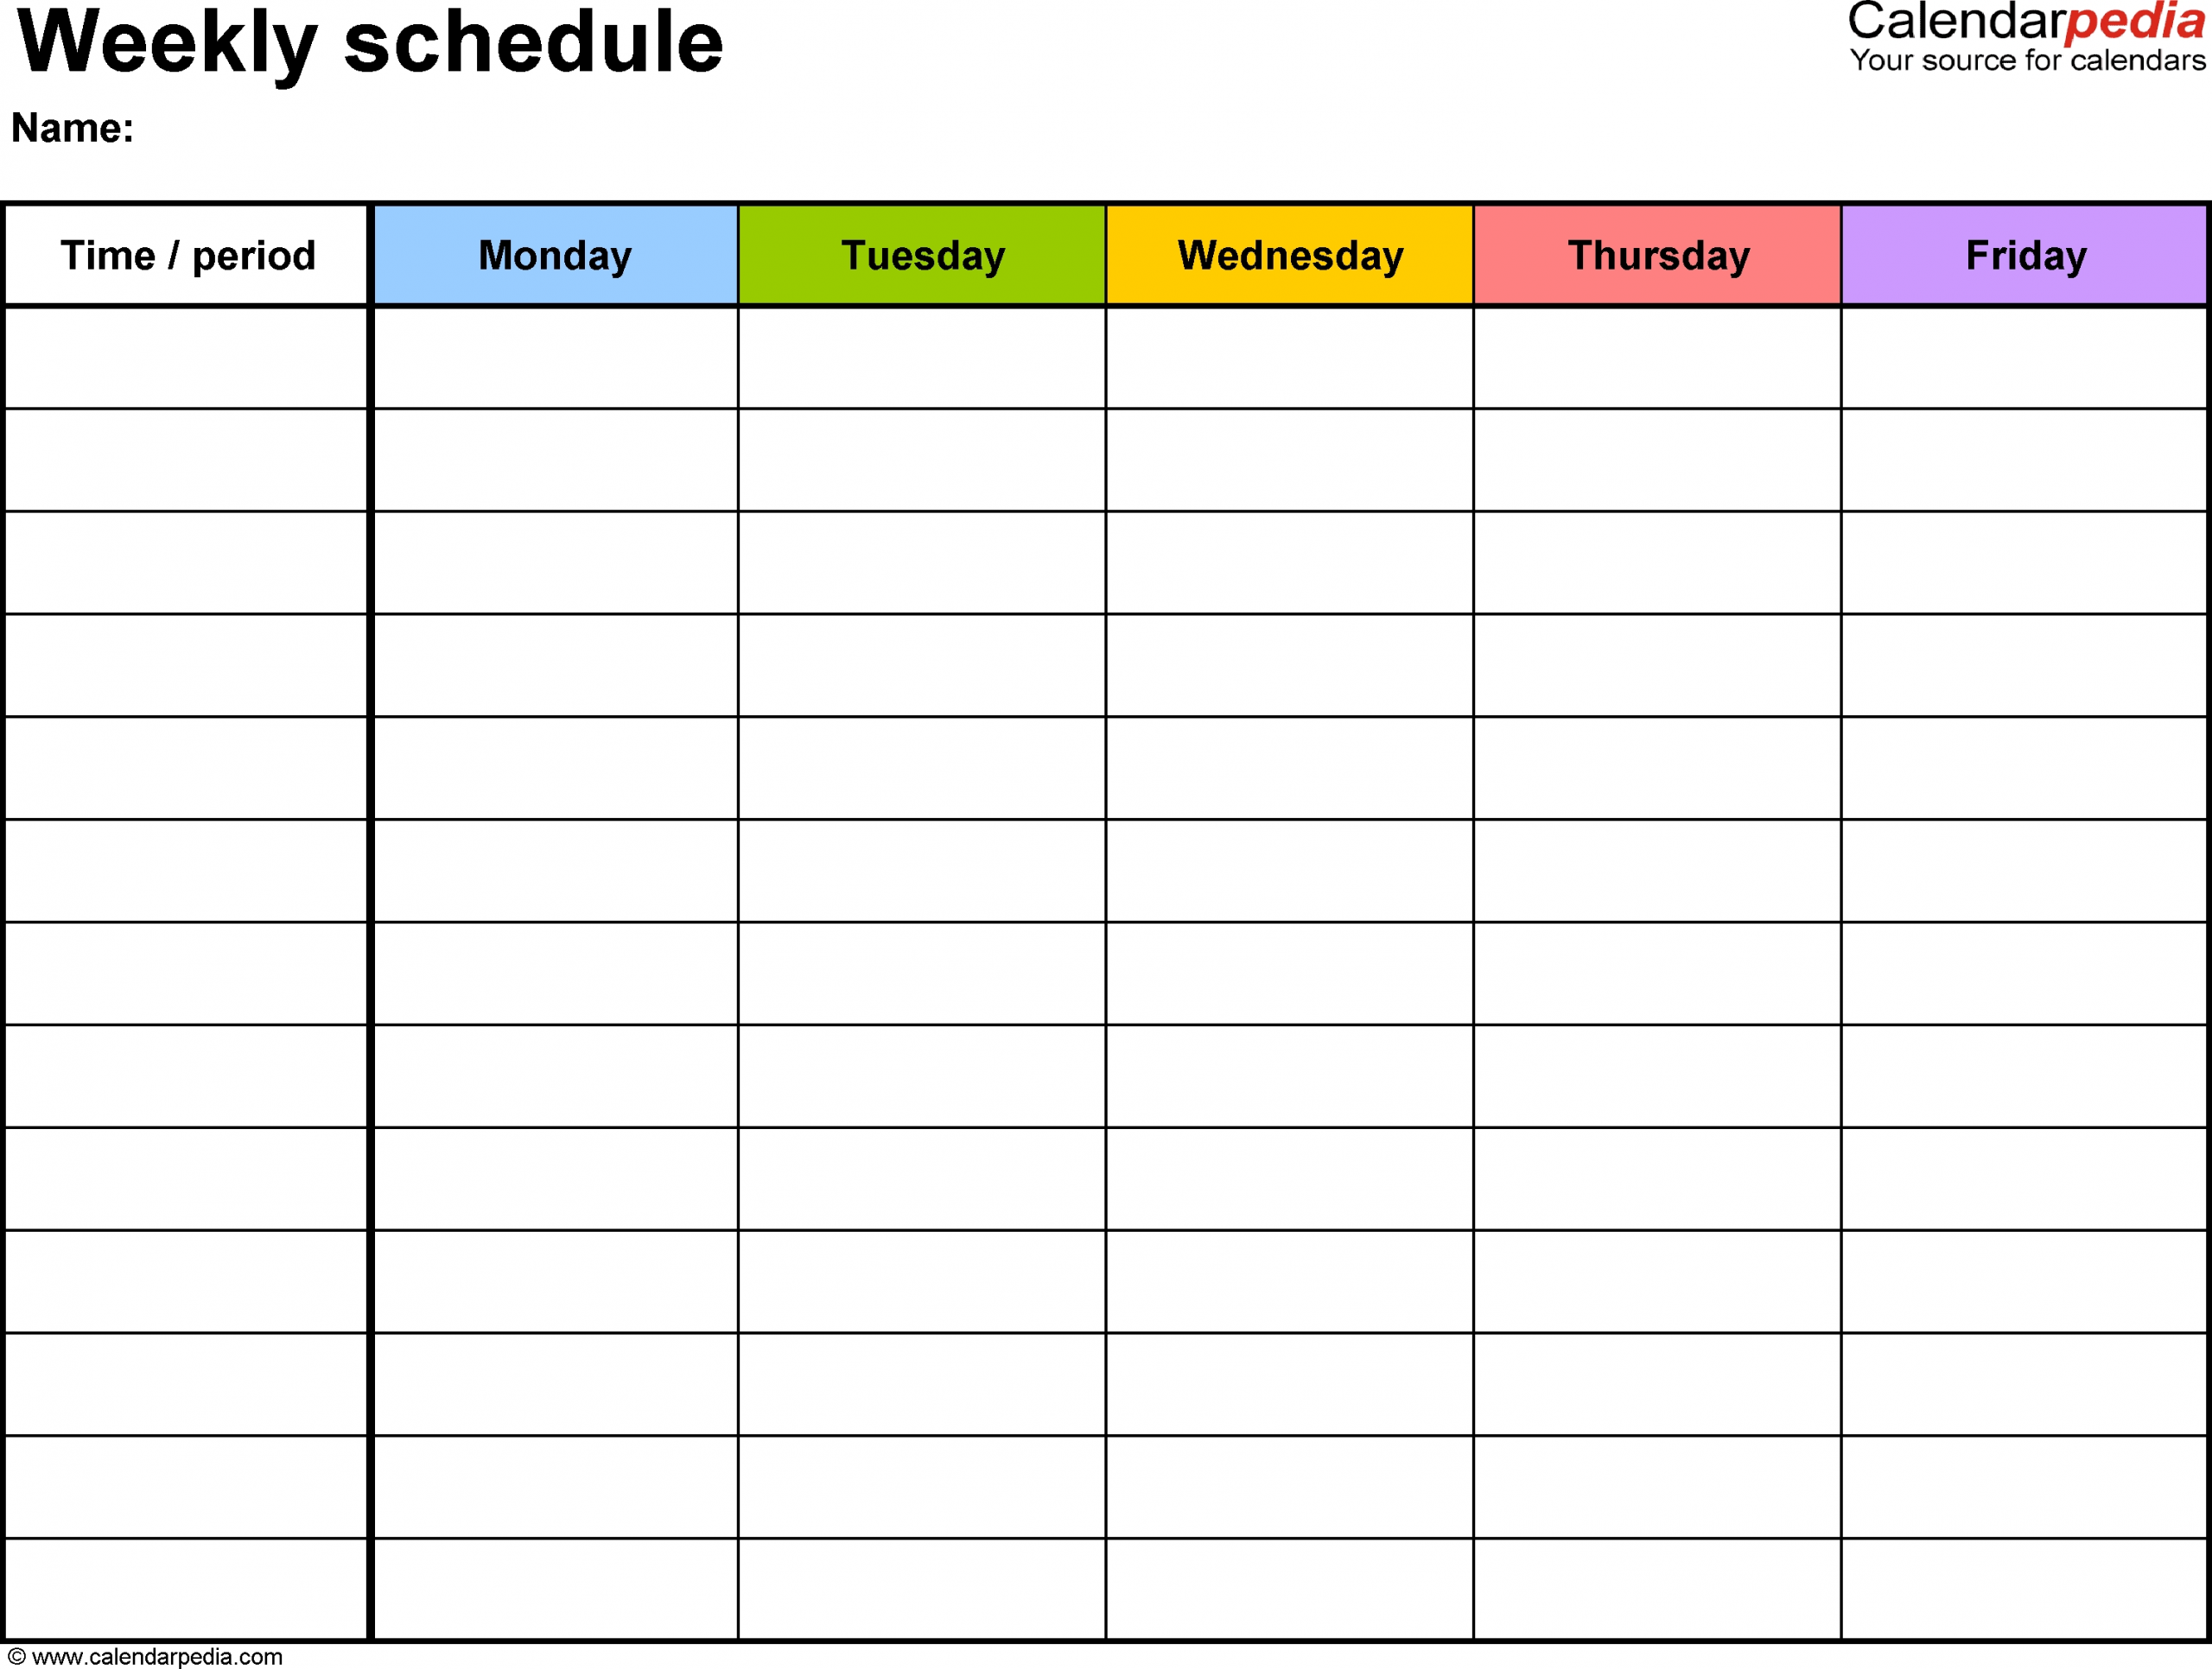 Free Weekly Schedule Templates For Word - 18 Templates A Week Calendar Template